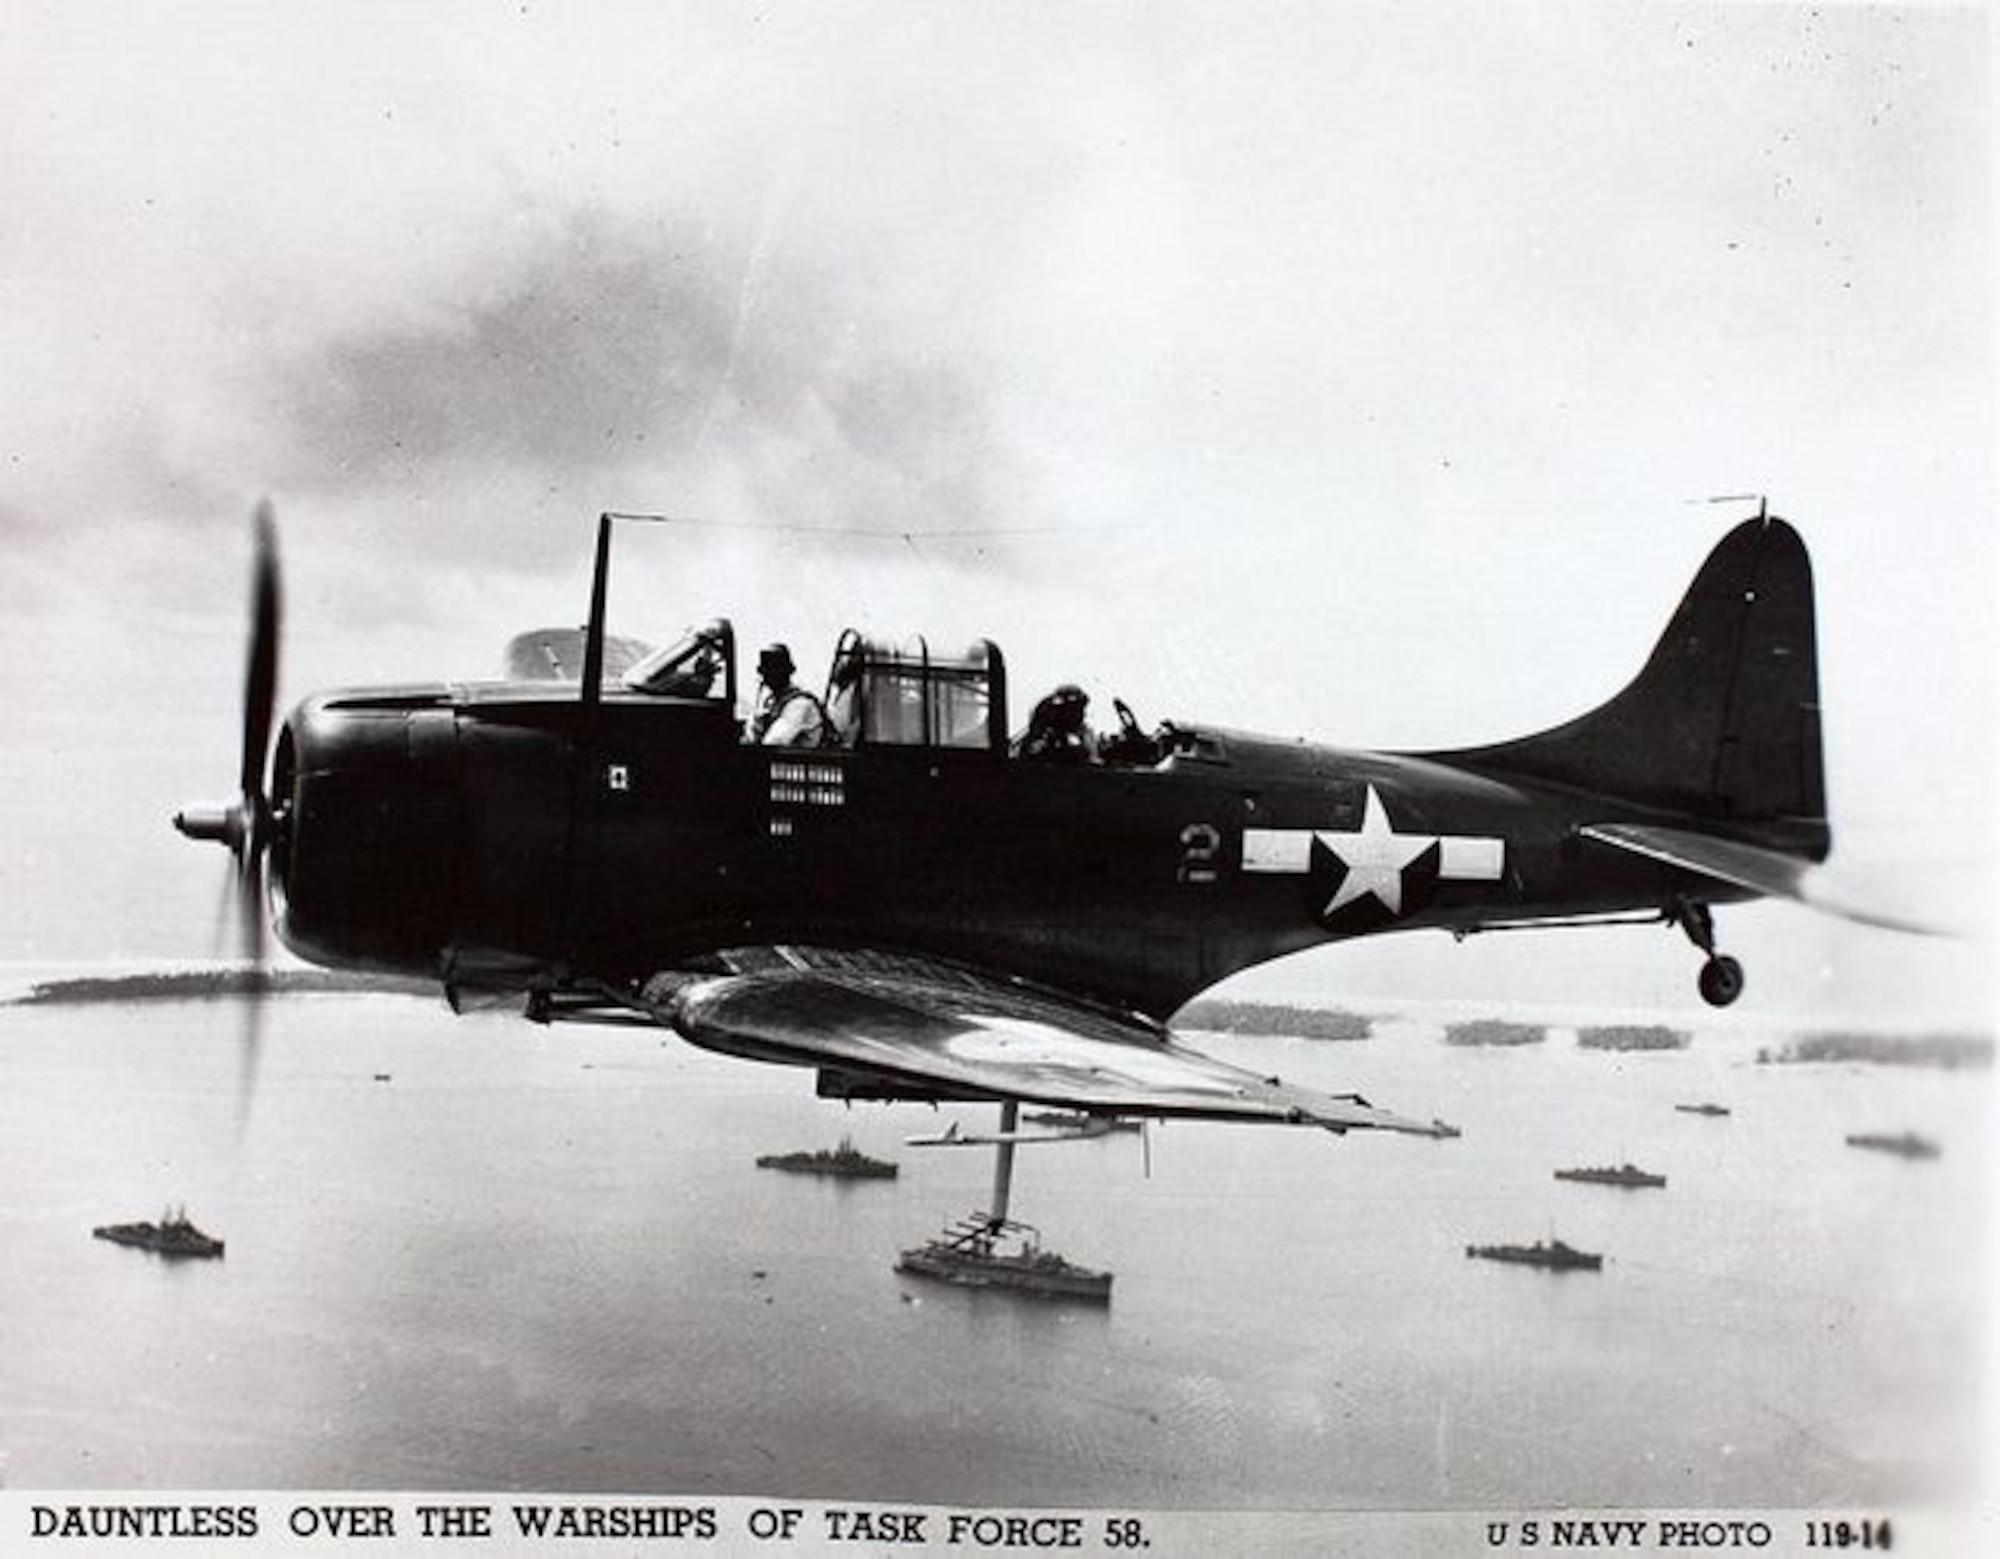 An SBD Douglas dive bomber flying over Task Force 58 in the Marshall Islands on the way to attack targets in the Marianas on June 15, 1944, the day U.S. forces landed on Saipan. It proved to be an excellent Navy scout plane and dive bomber and sank more enemy shipping in the Pacific War than any other Allied aircraft.